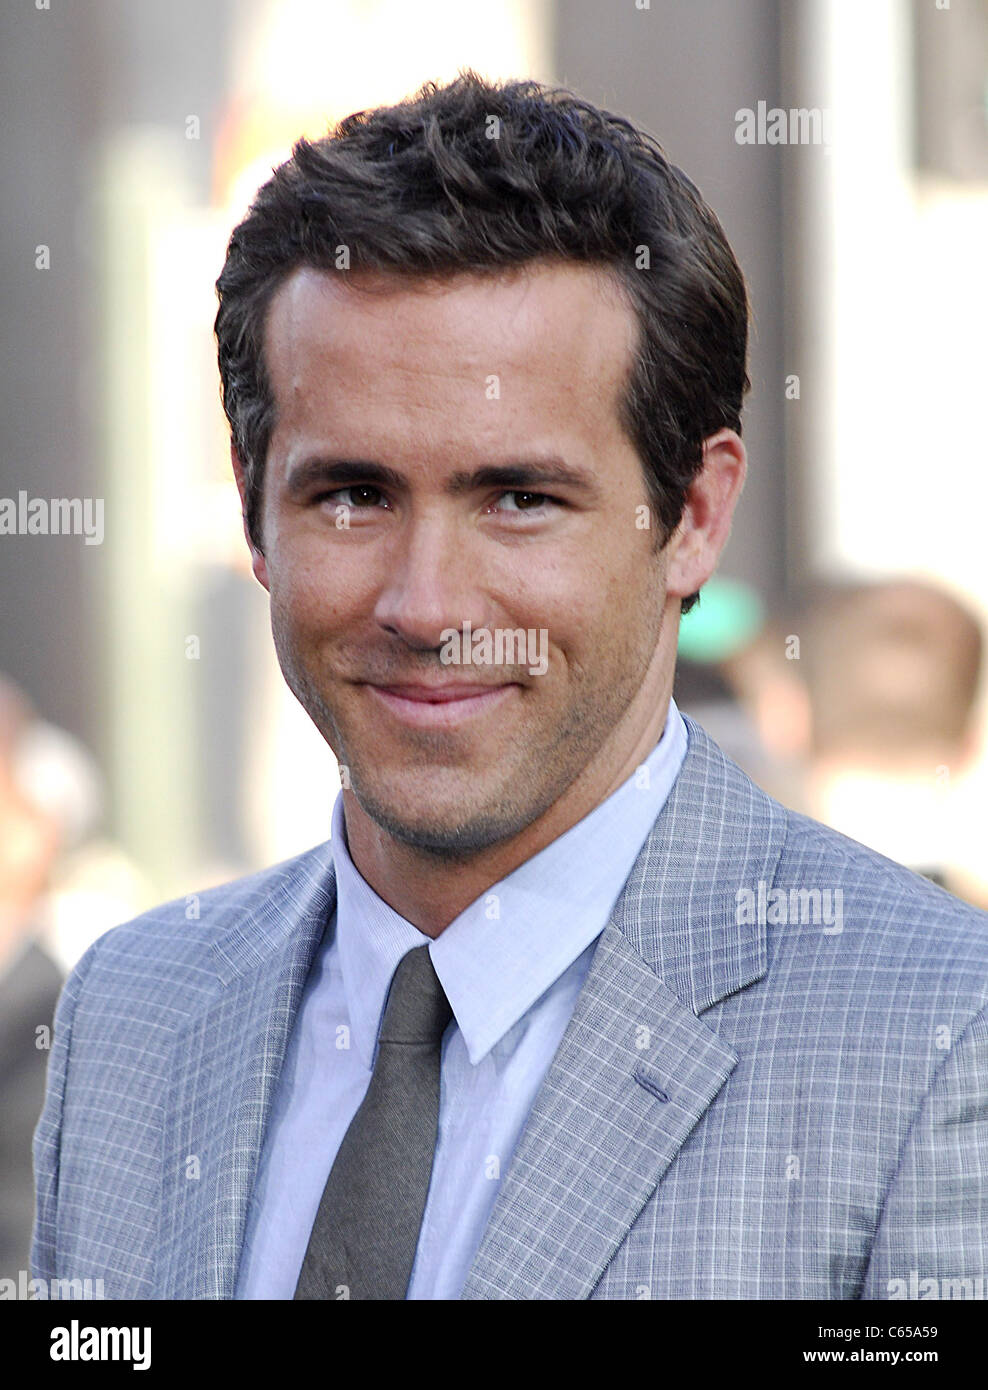 Ryan Reynolds at arrivals for GREEN LANTERN Premiere, Grauman's Chinese Theatre, Los Angeles, CA June 15, 2011. Photo By: Elizabeth Goodenough/Everett Collection Stock Photo